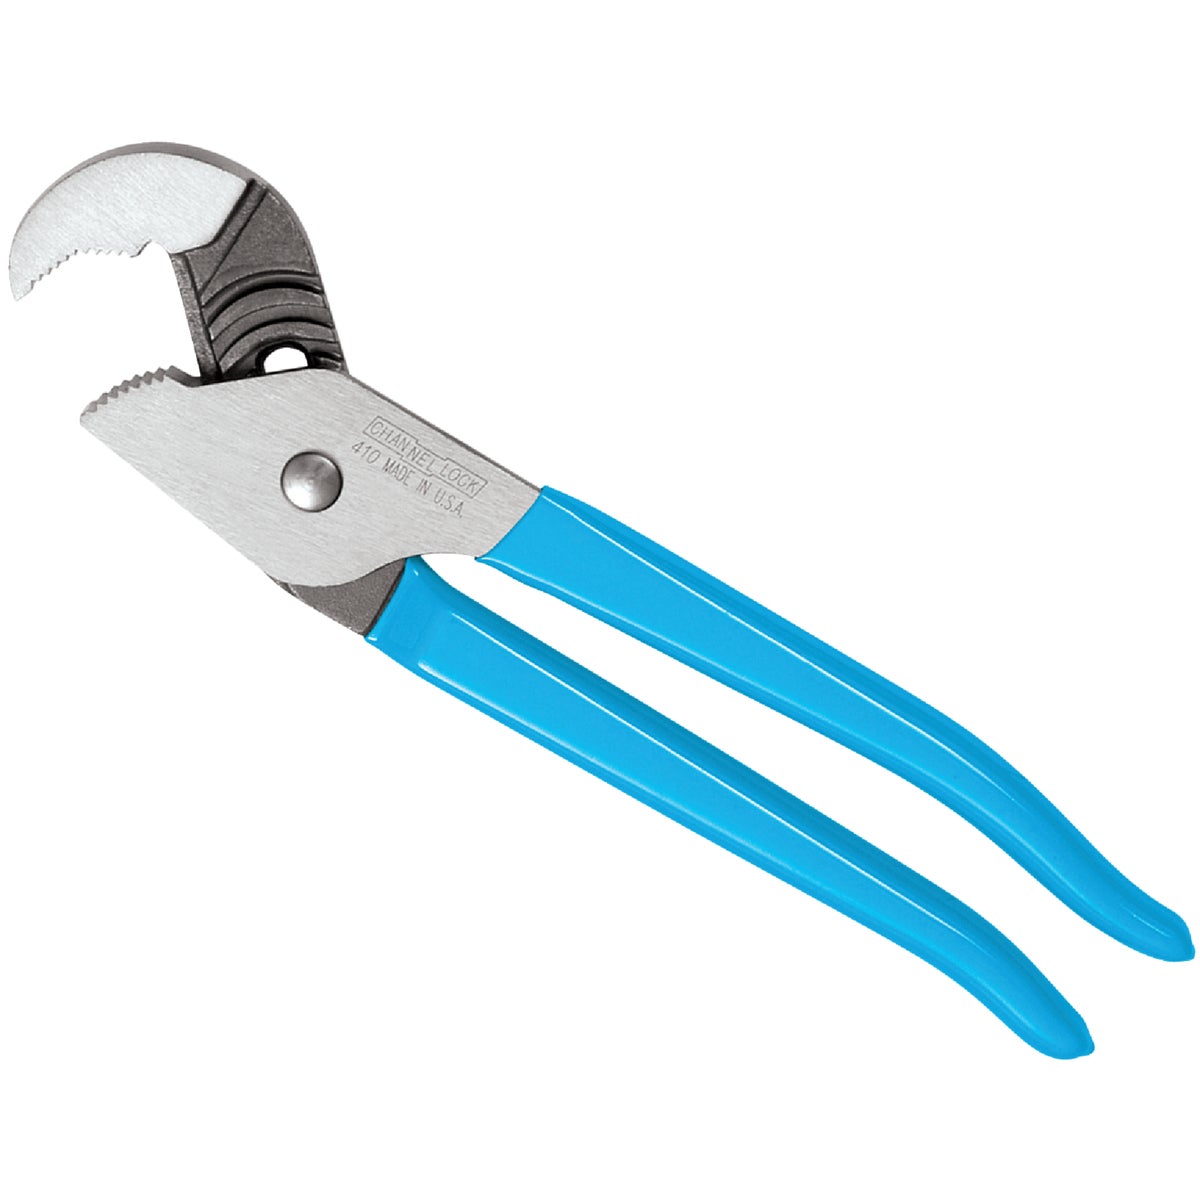 Channellock Nutbuster 9-1/2 In. Curved Groove Joint Pliers